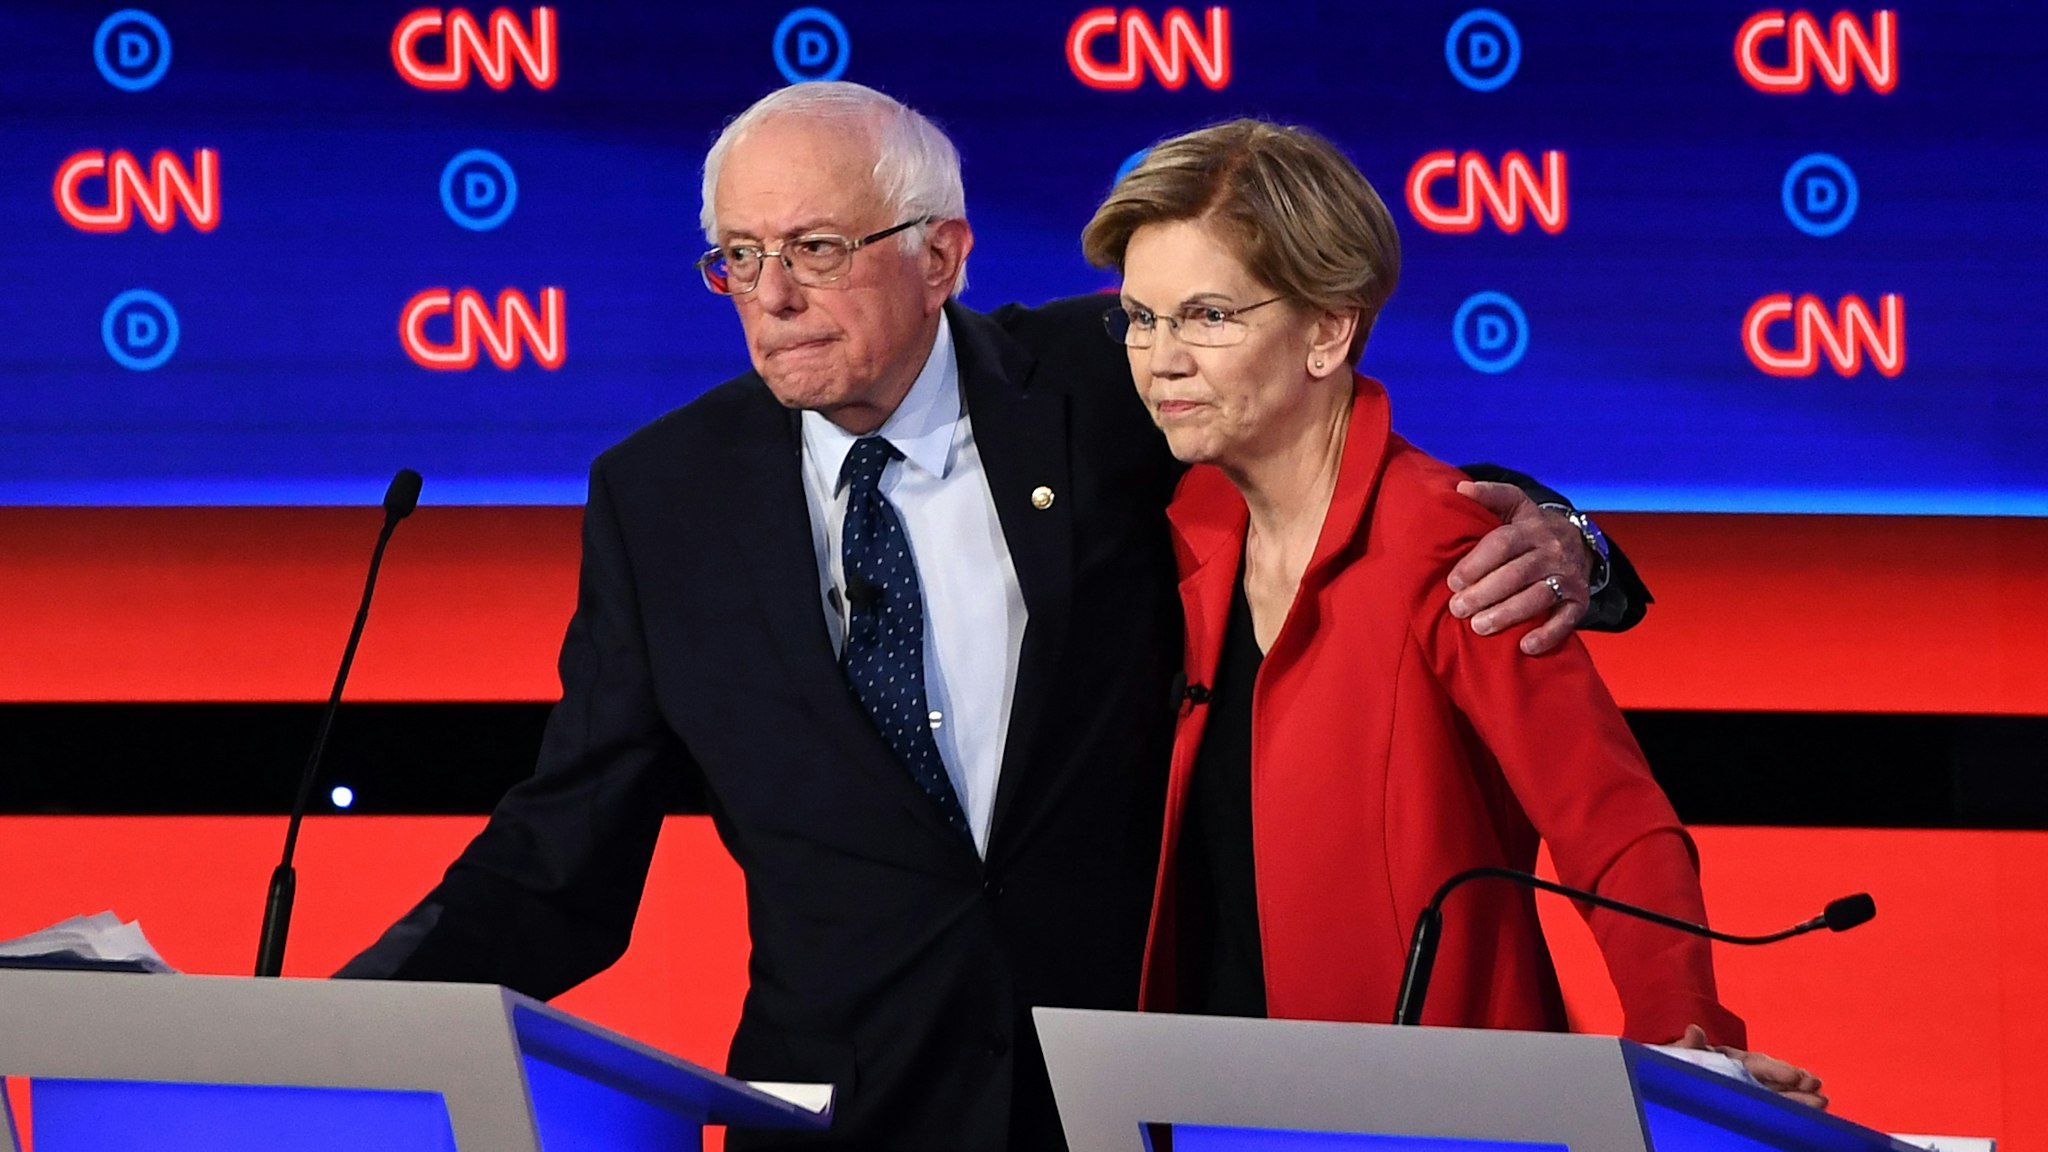 Democratic presidential hopefuls US senator from Vermont Bernie Sanders (L) and US Senator from Massachusetts Elizabeth Warren hug after participating in the first round of the second Democratic primary debate of the 2020 presidential campaign season hosted by CNN at the Fox Theatre in Detroit, Michigan on July 30, 2019.